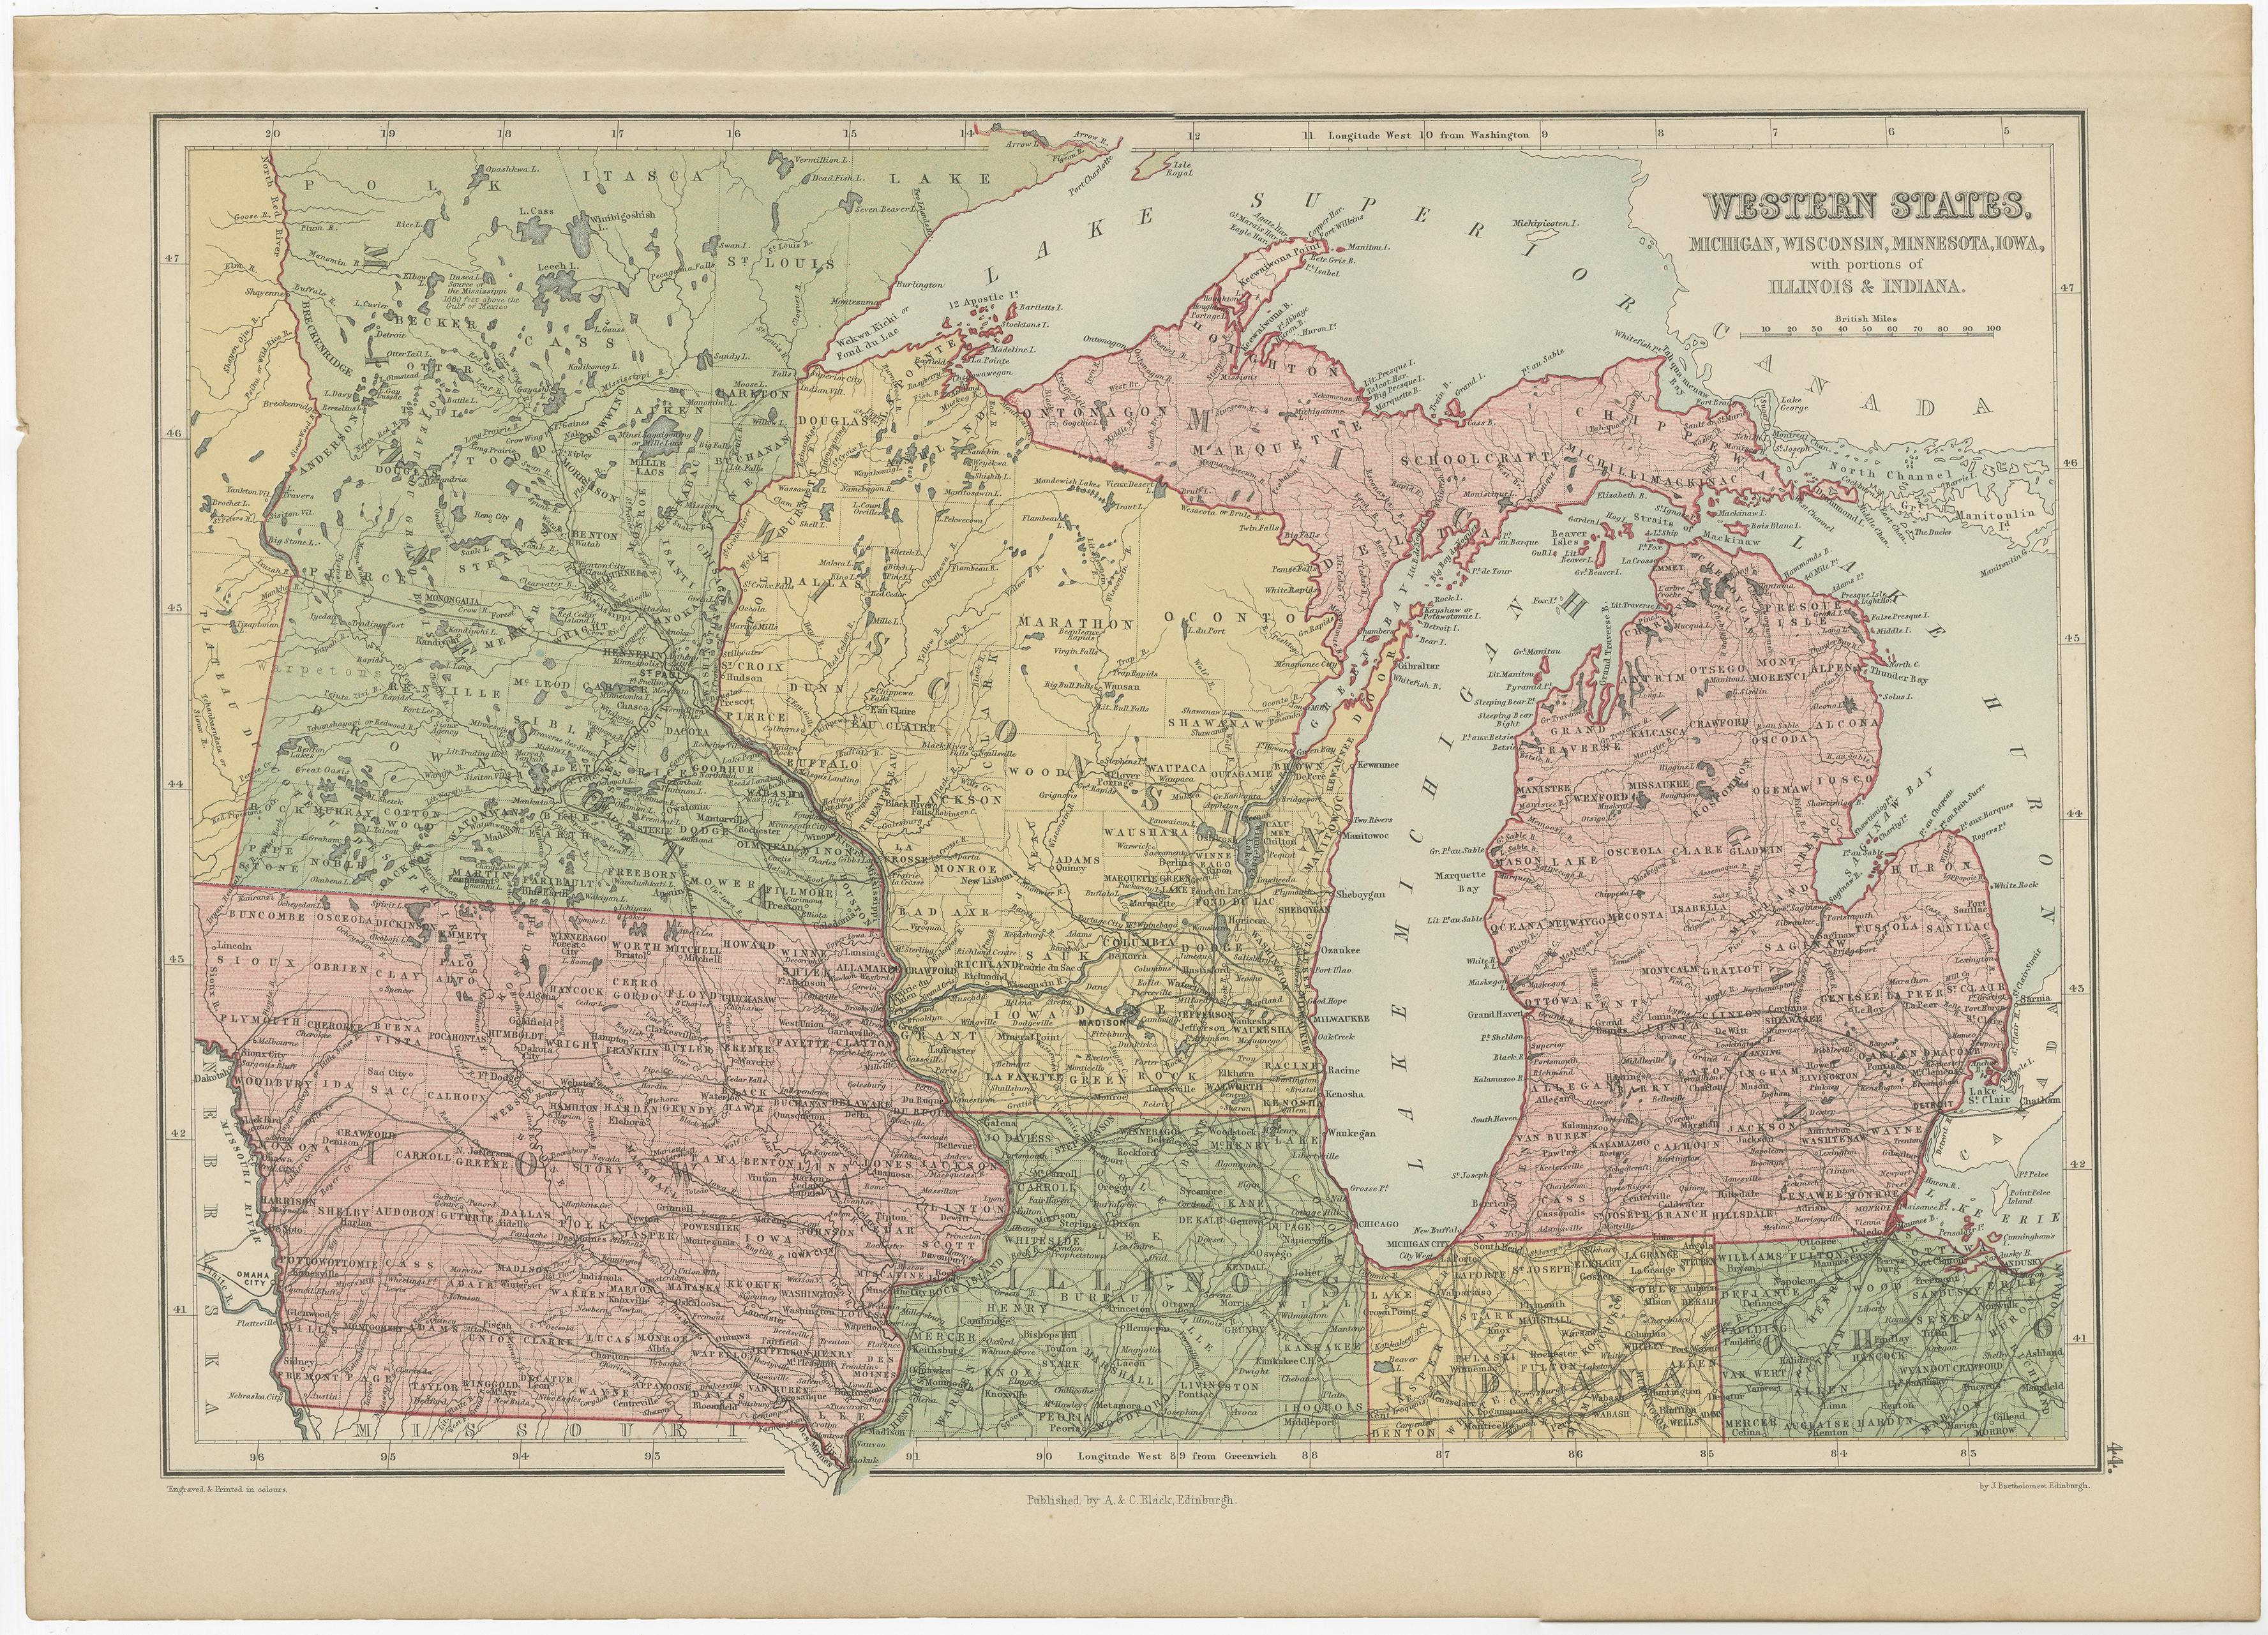 Antique map titled 'Western States, Michigan, Wisconsin, Minnesota, Iowa with portions of Illinois & Indiana'. Original antique map of Western States, Michigan, Wisconsin, Minnesota, Iowa with portion of Illinois & Indiana. This map originates from